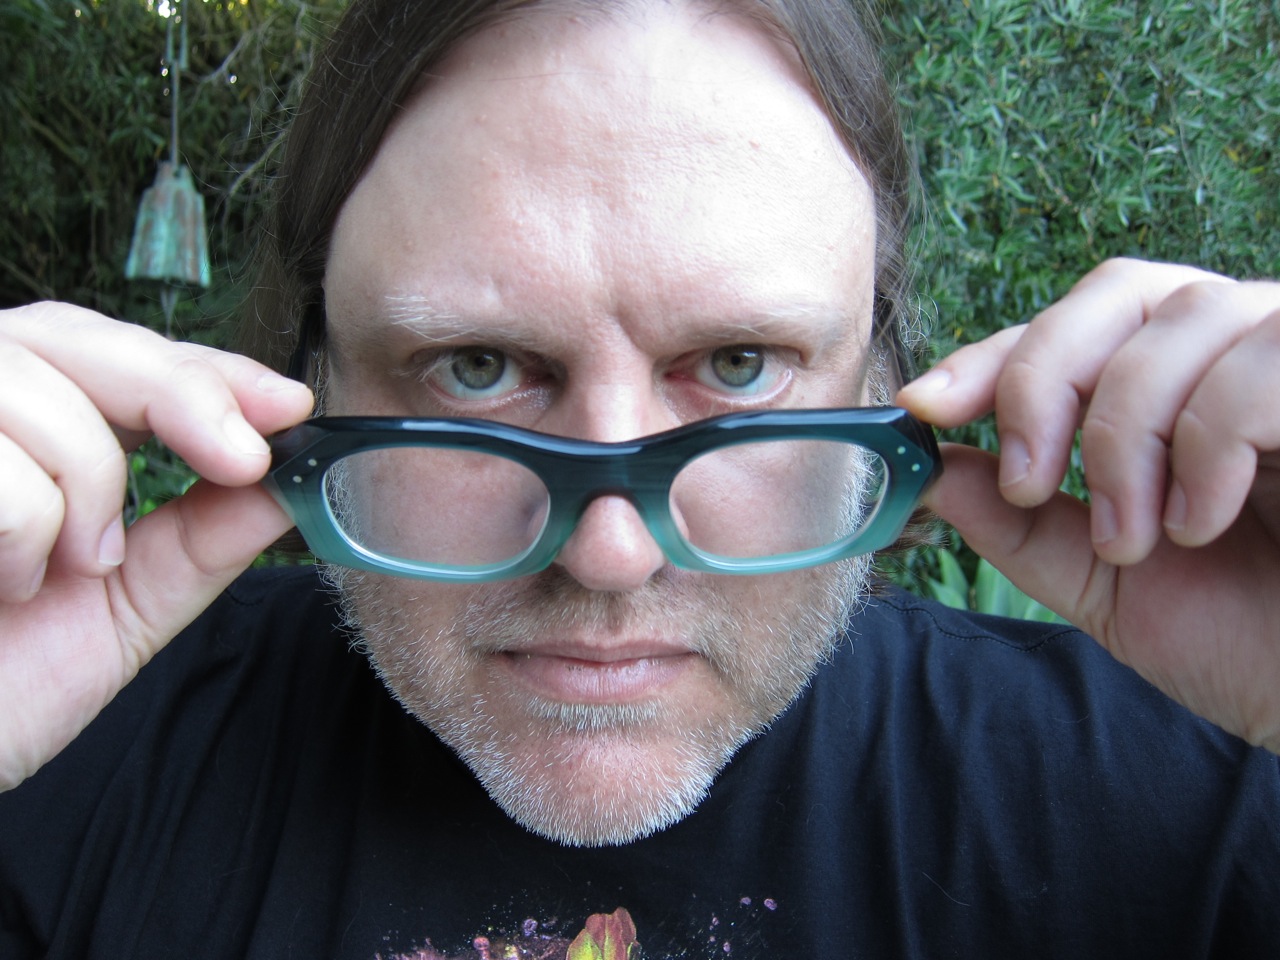 Tonight: Go See Matthew Sweet at The Heights Theater